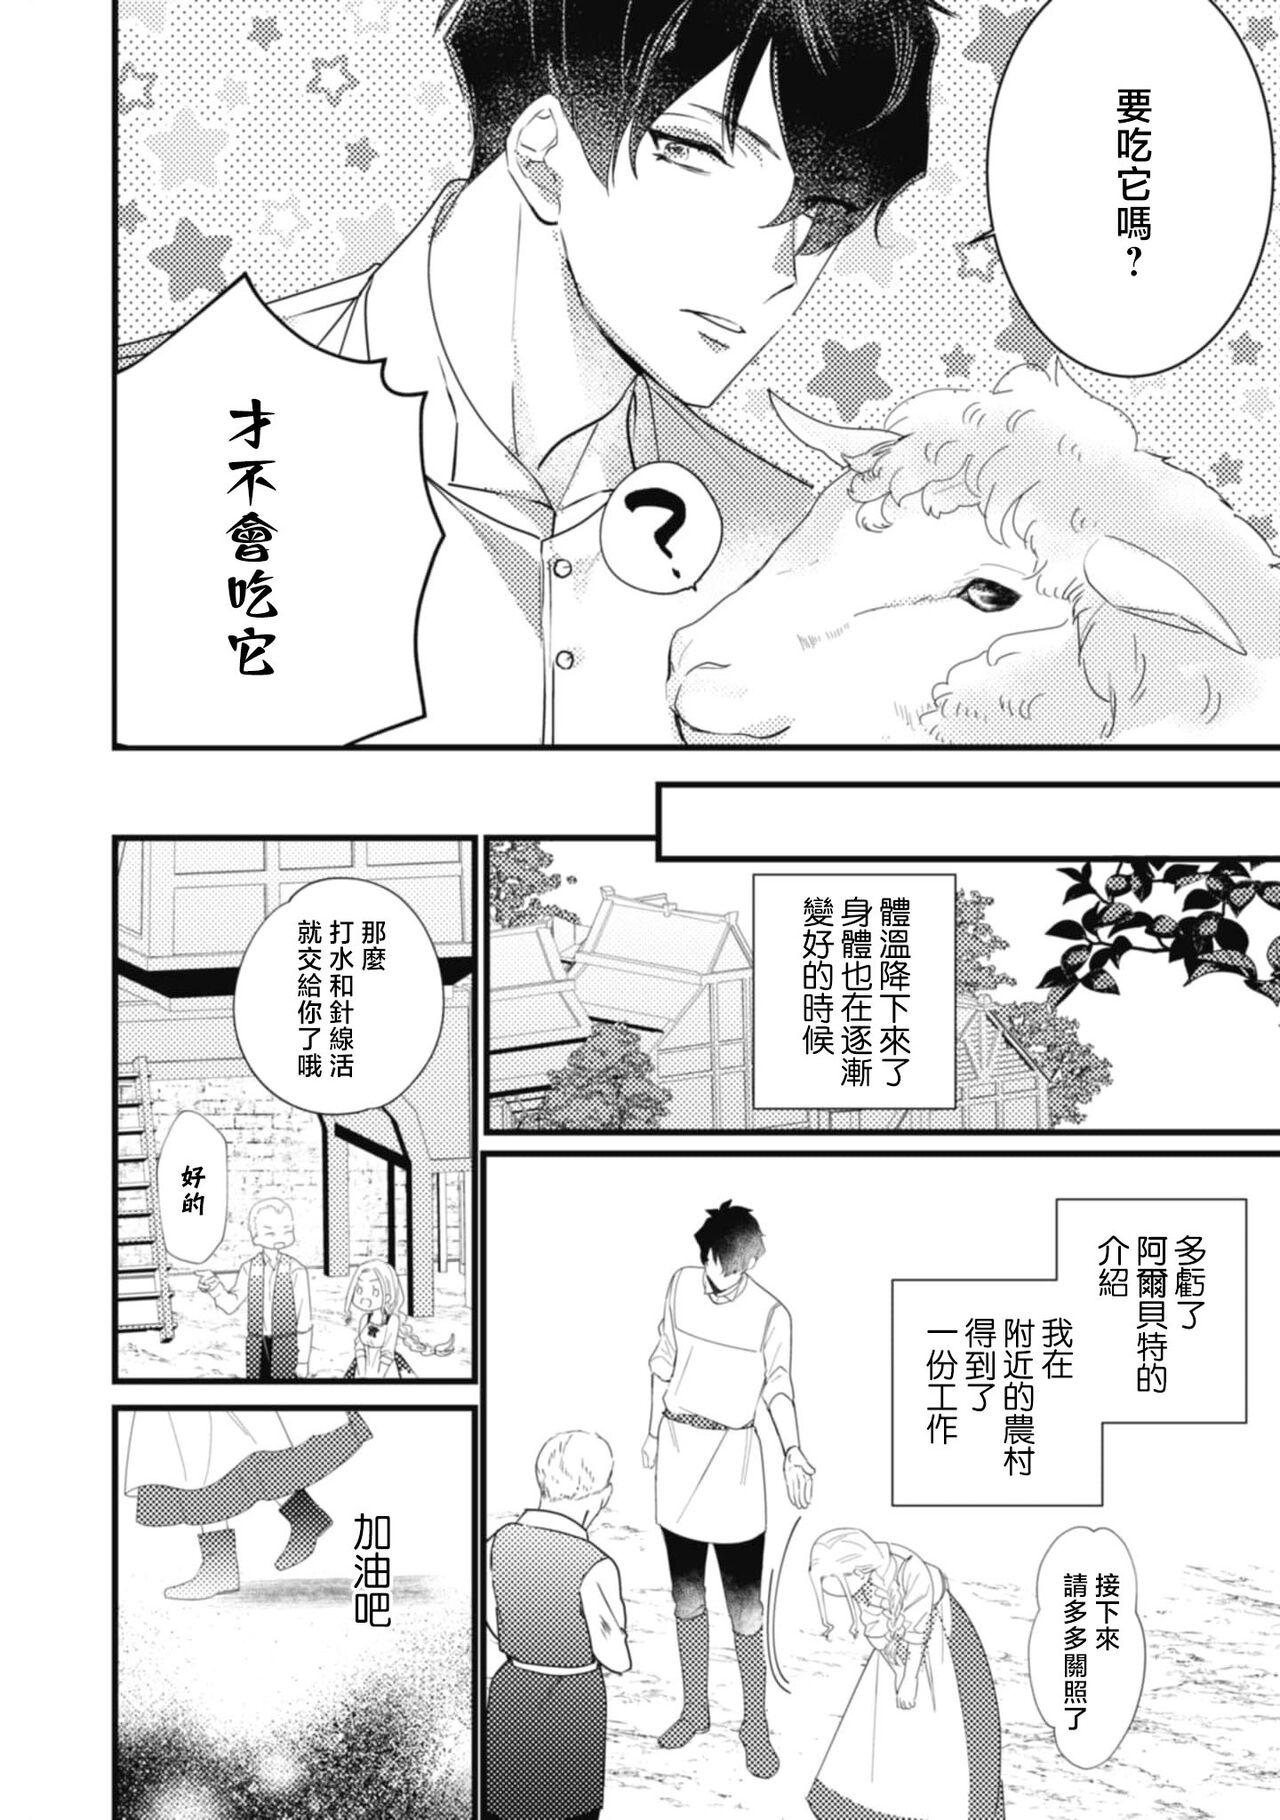 A shepherd in love with a demoted knight | 与被贬骑士相爱的牧羊女1 28